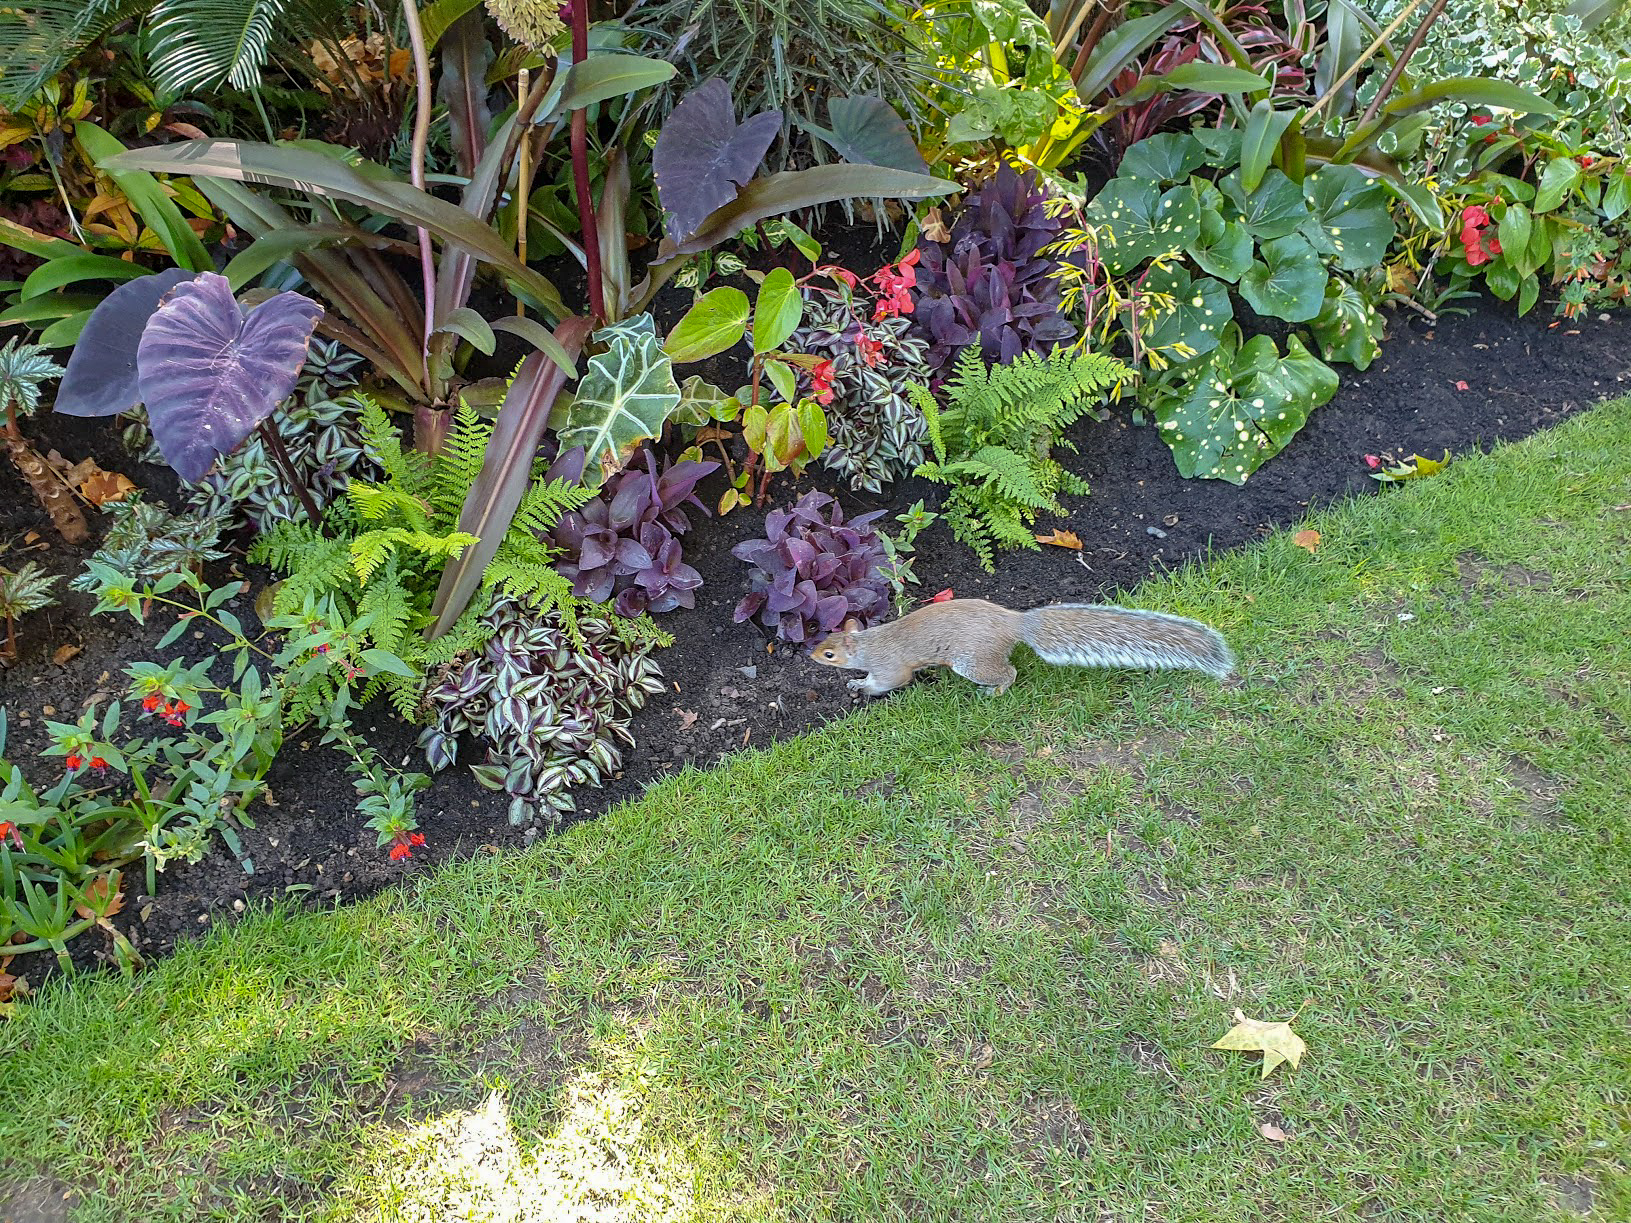 A grey squirrel by the plants in St James's Park